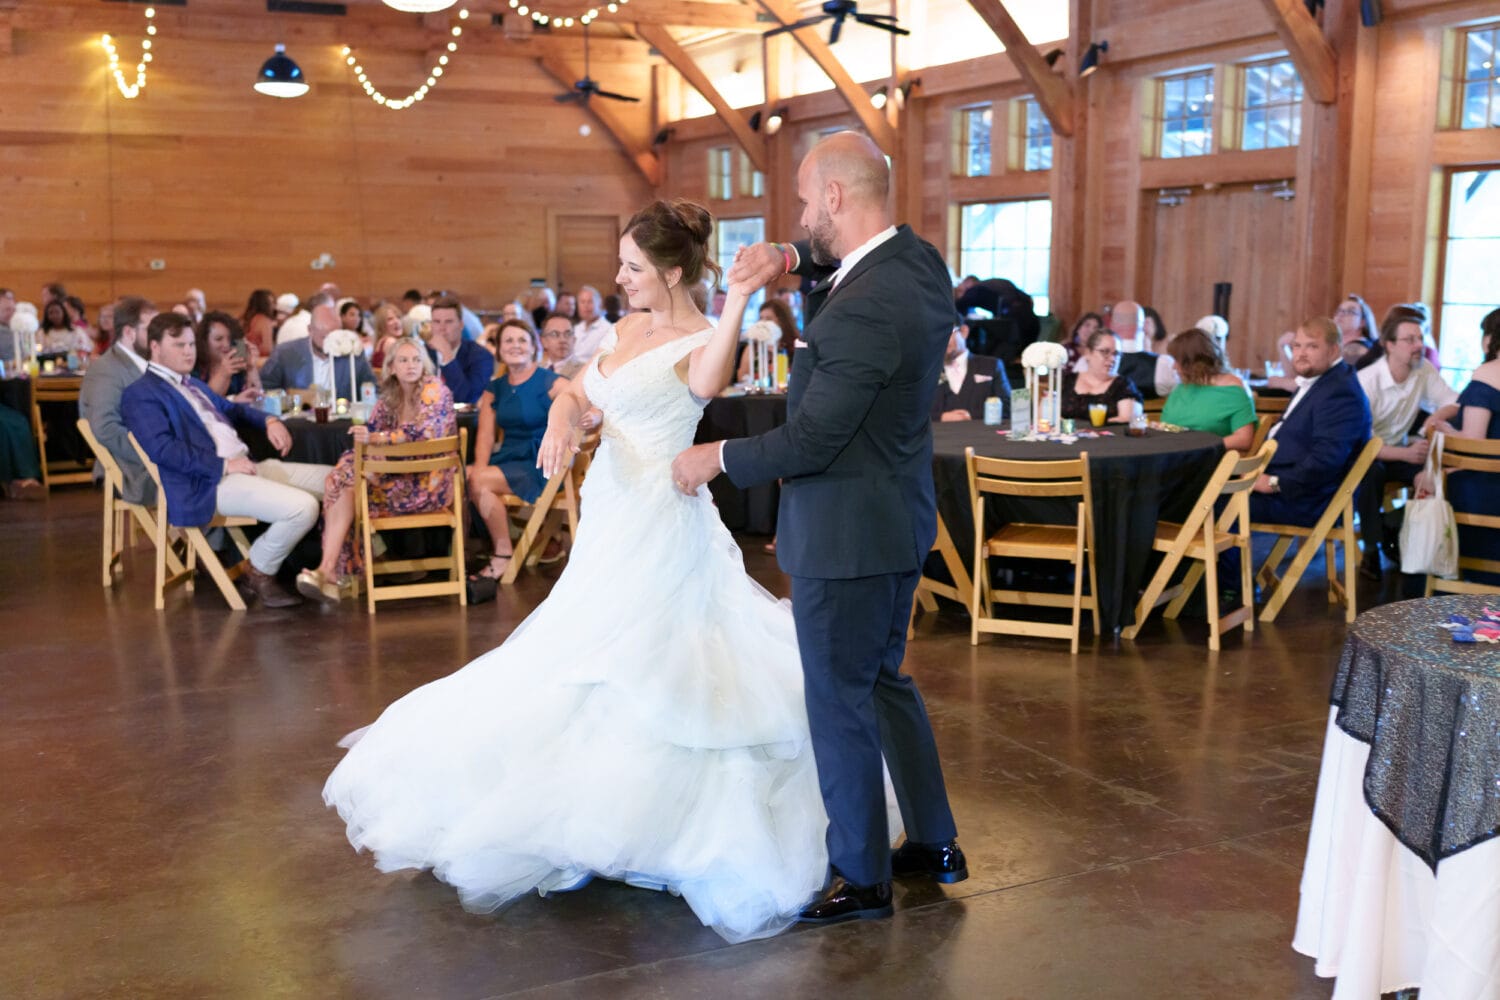 First dance with bride and groom - The Pavilion at Pepper Plantation